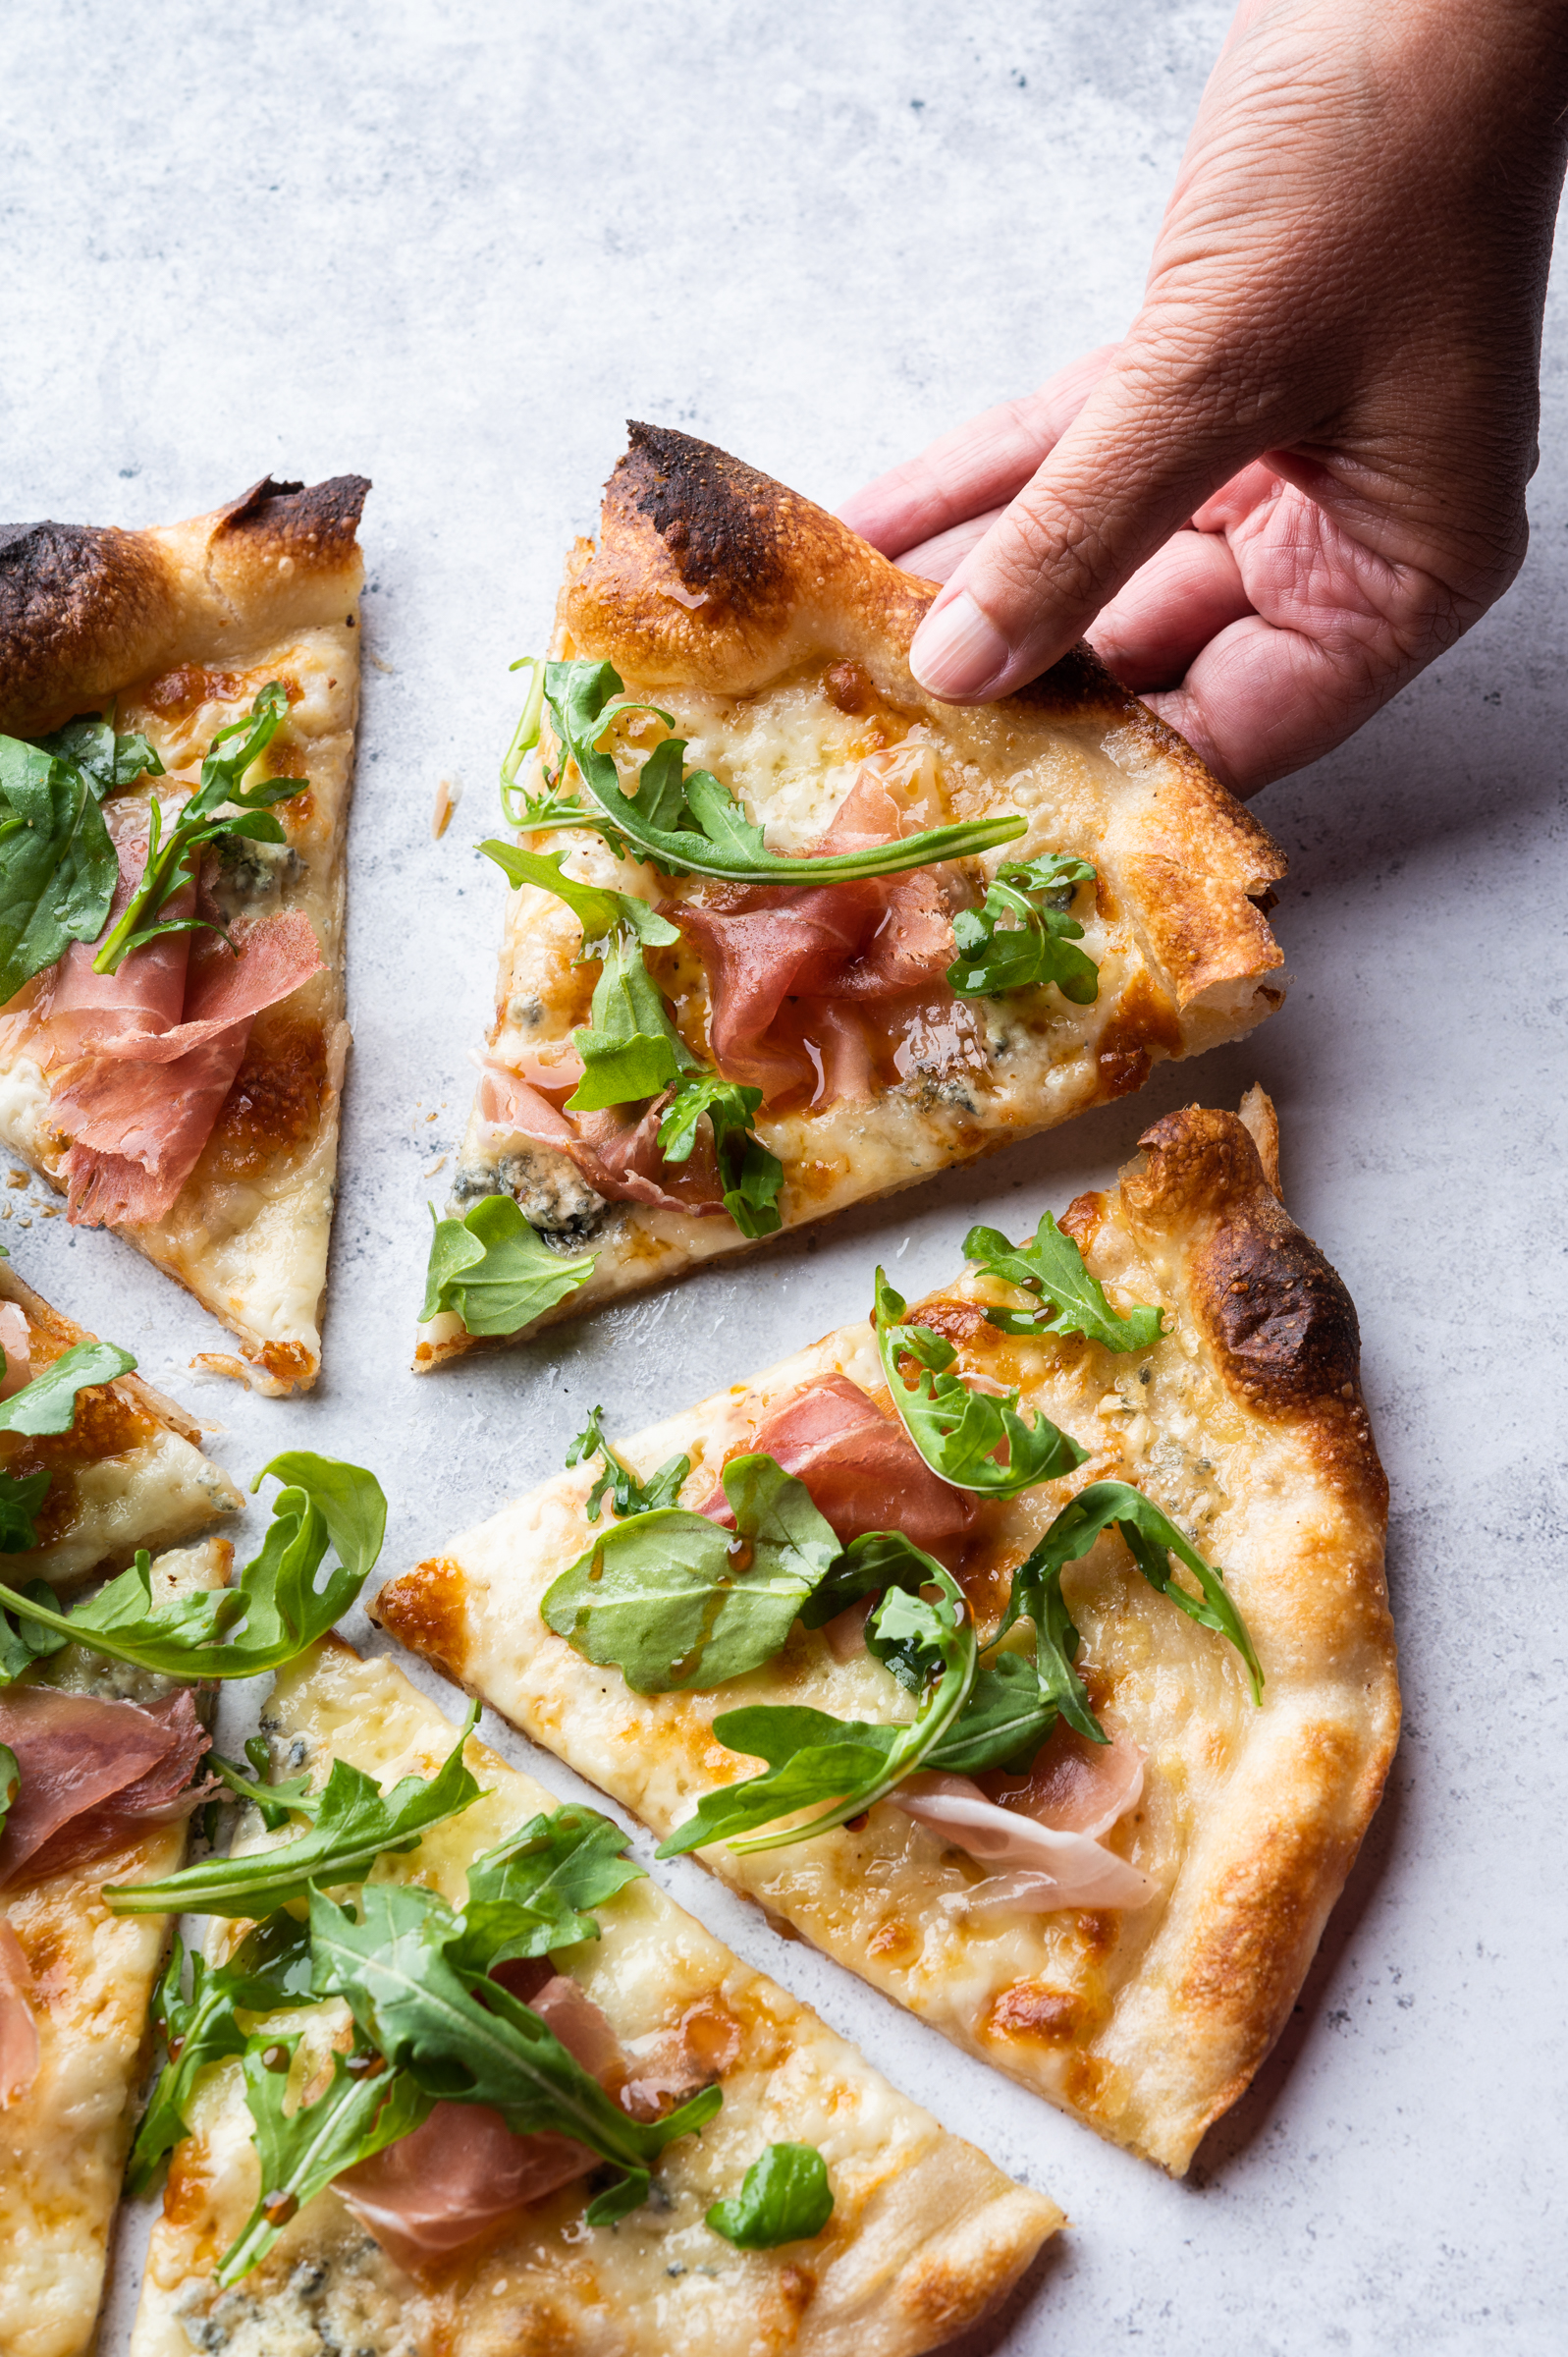 A hand reaches for for a slice of fresh pizza with prosciutto, arugula and balsamic vinegar